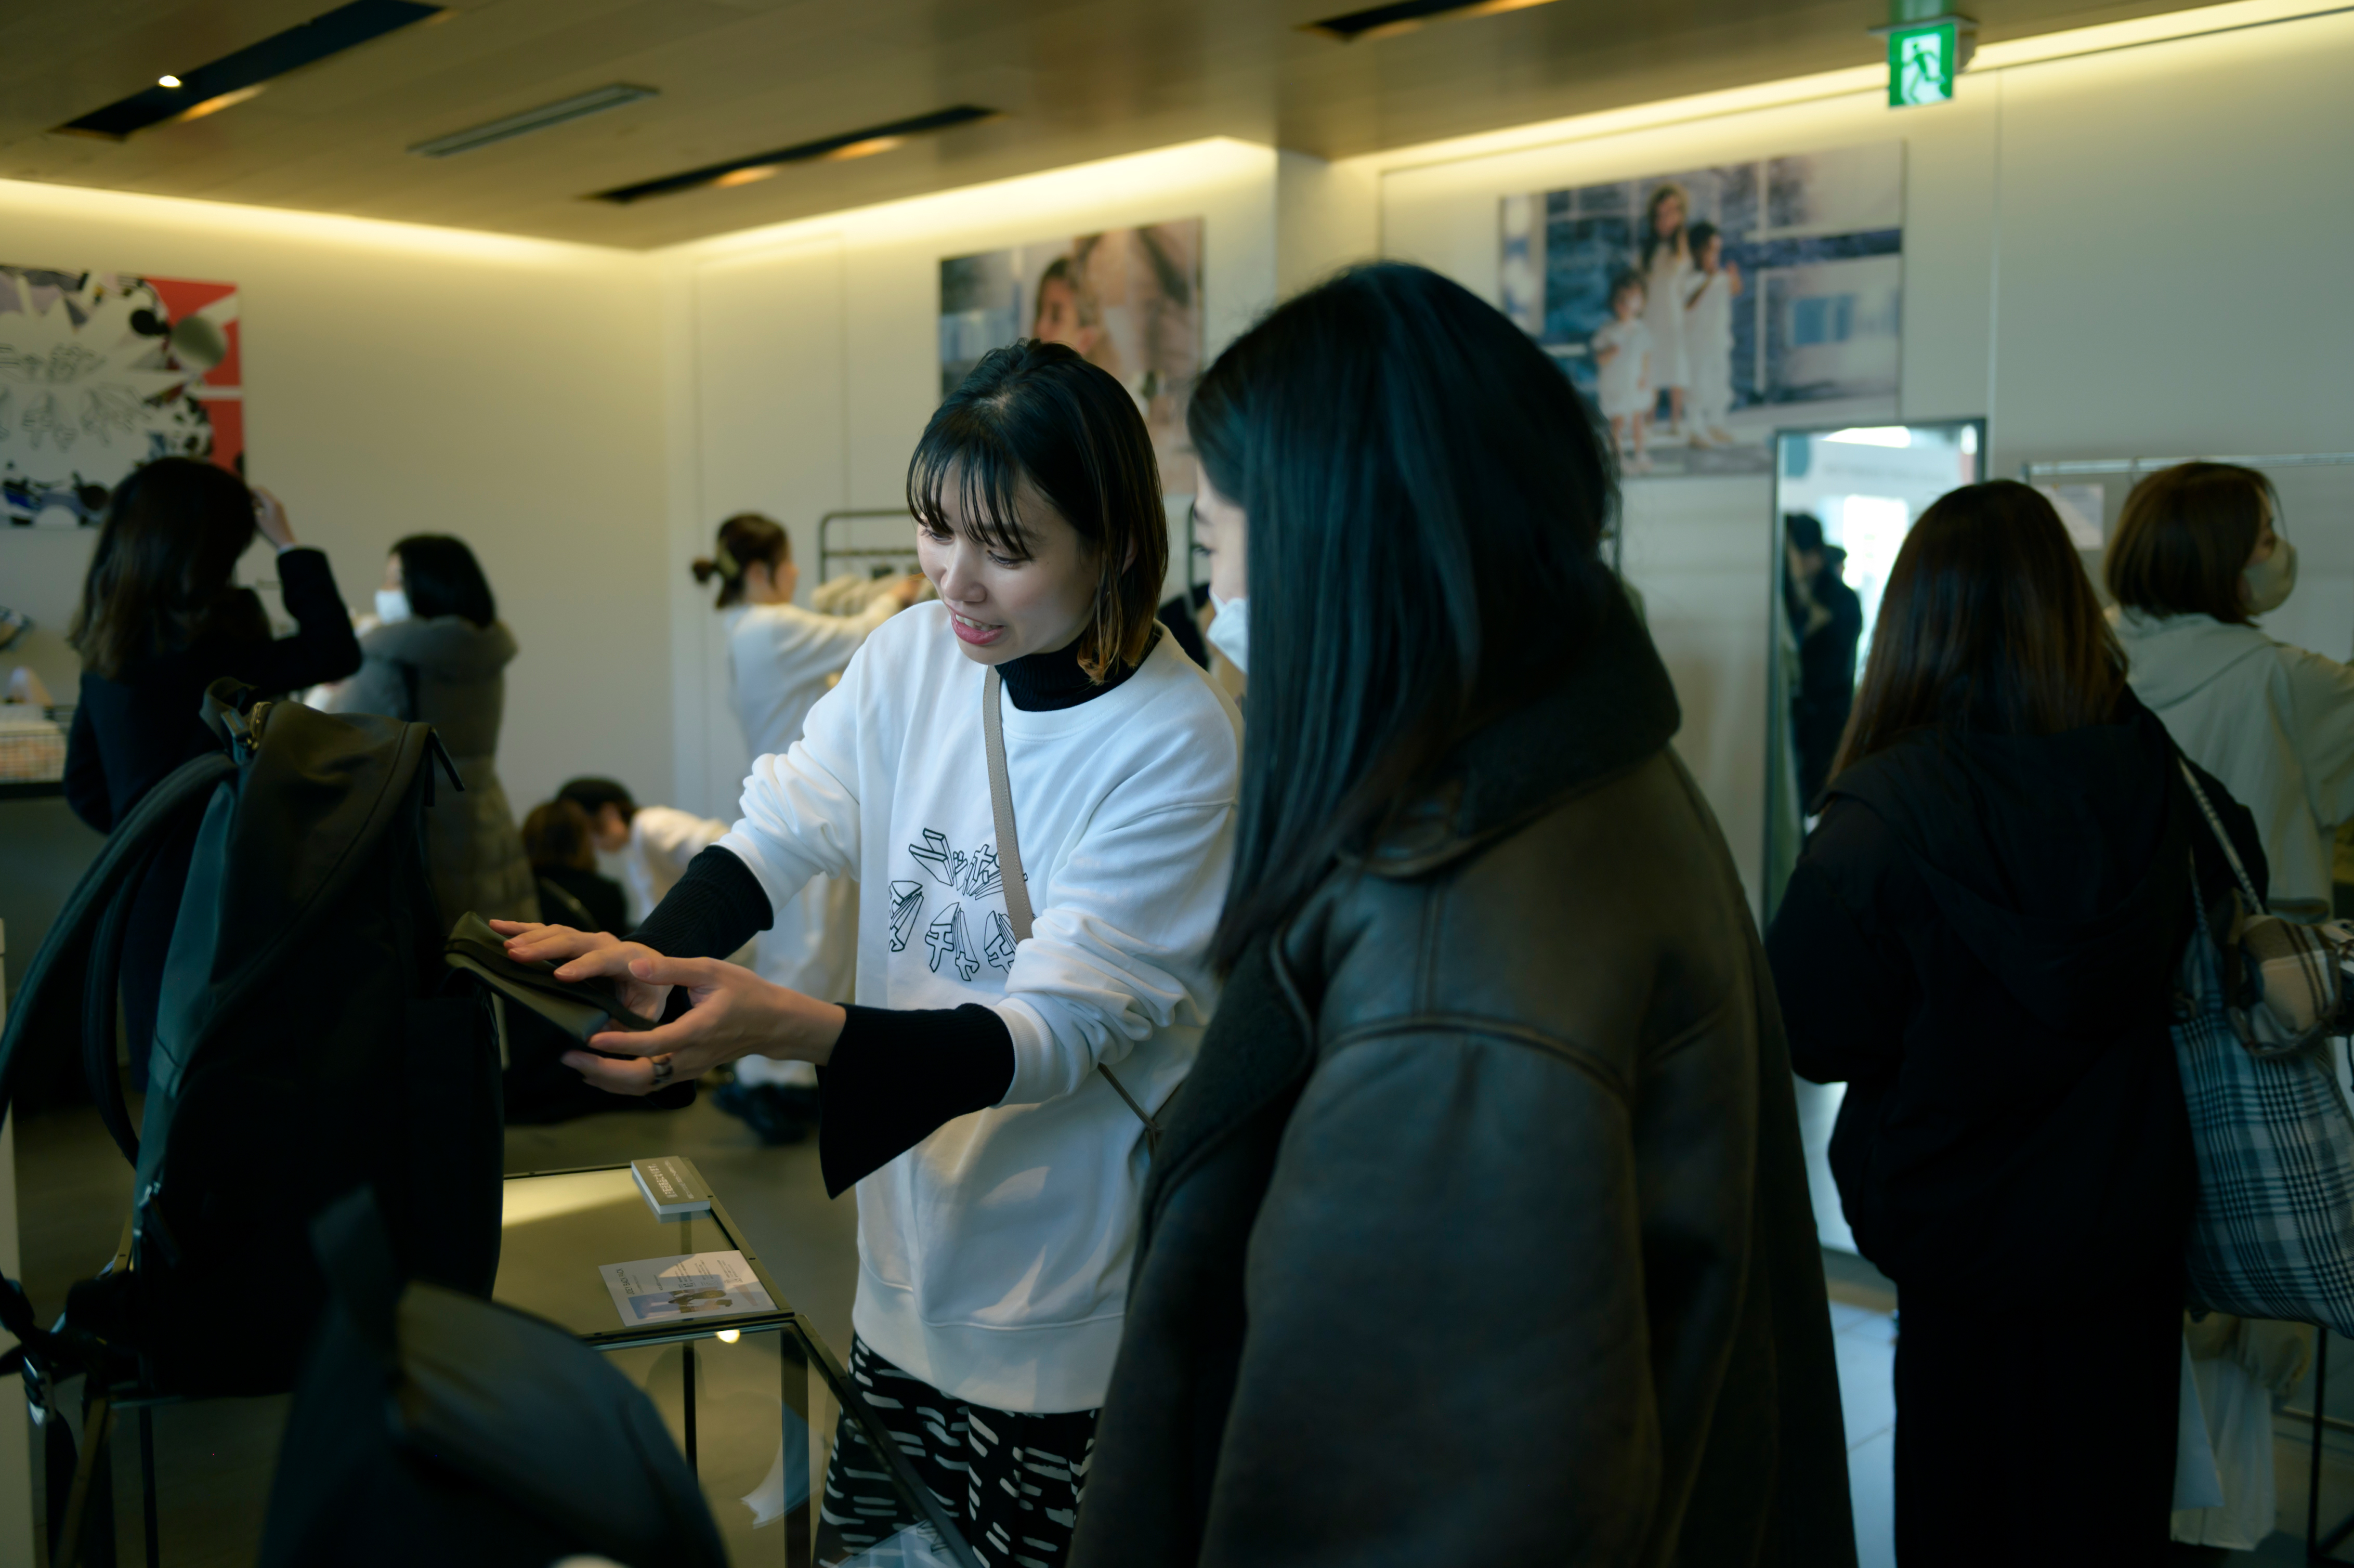 【Event Report】24SS JOINT EXHIBITION